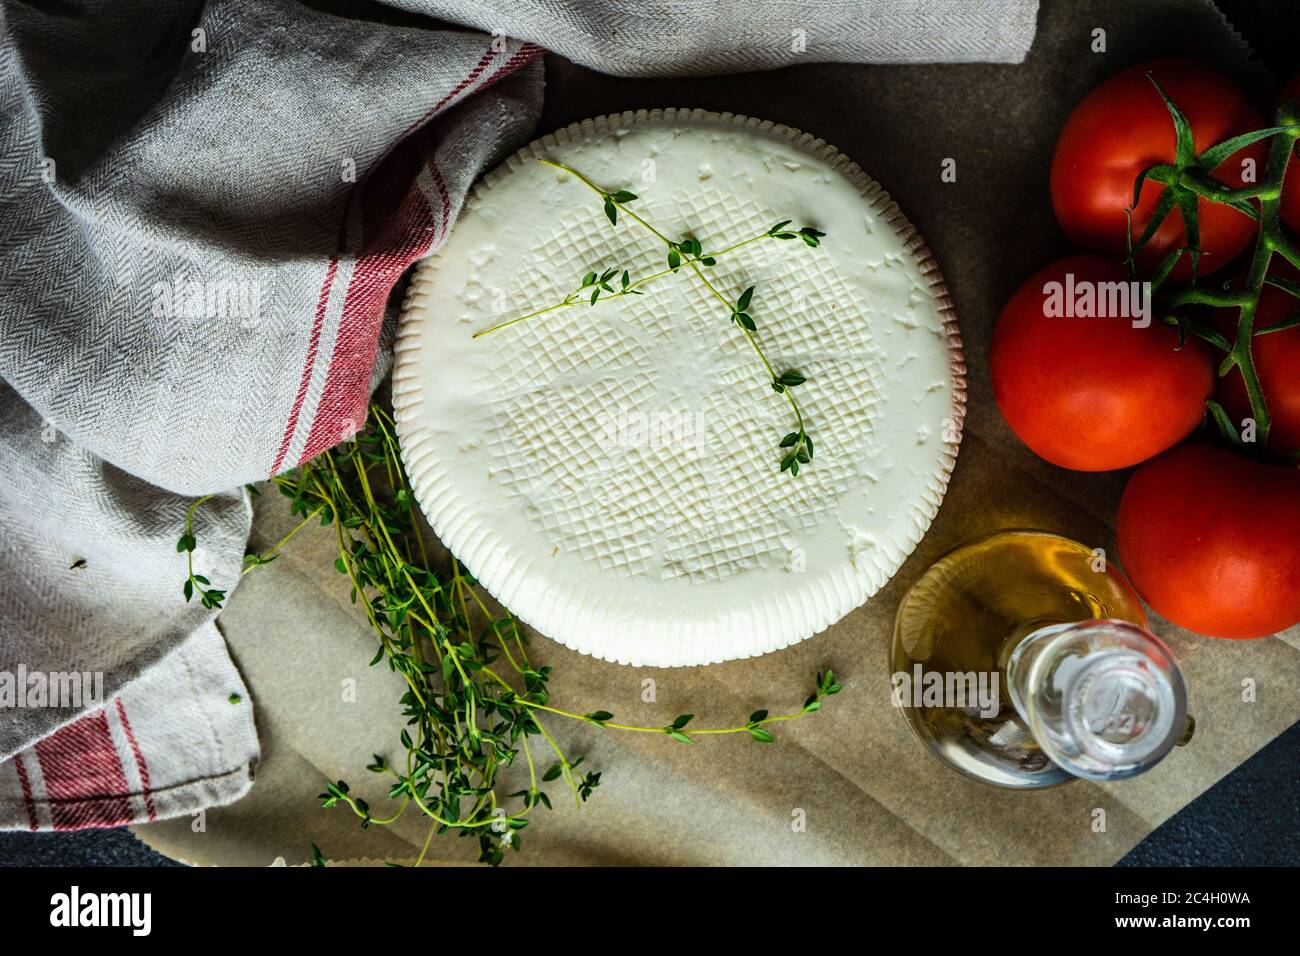 Georgian imeruli cheese with herbs, vegetable and oil on rustic background Stock Photo